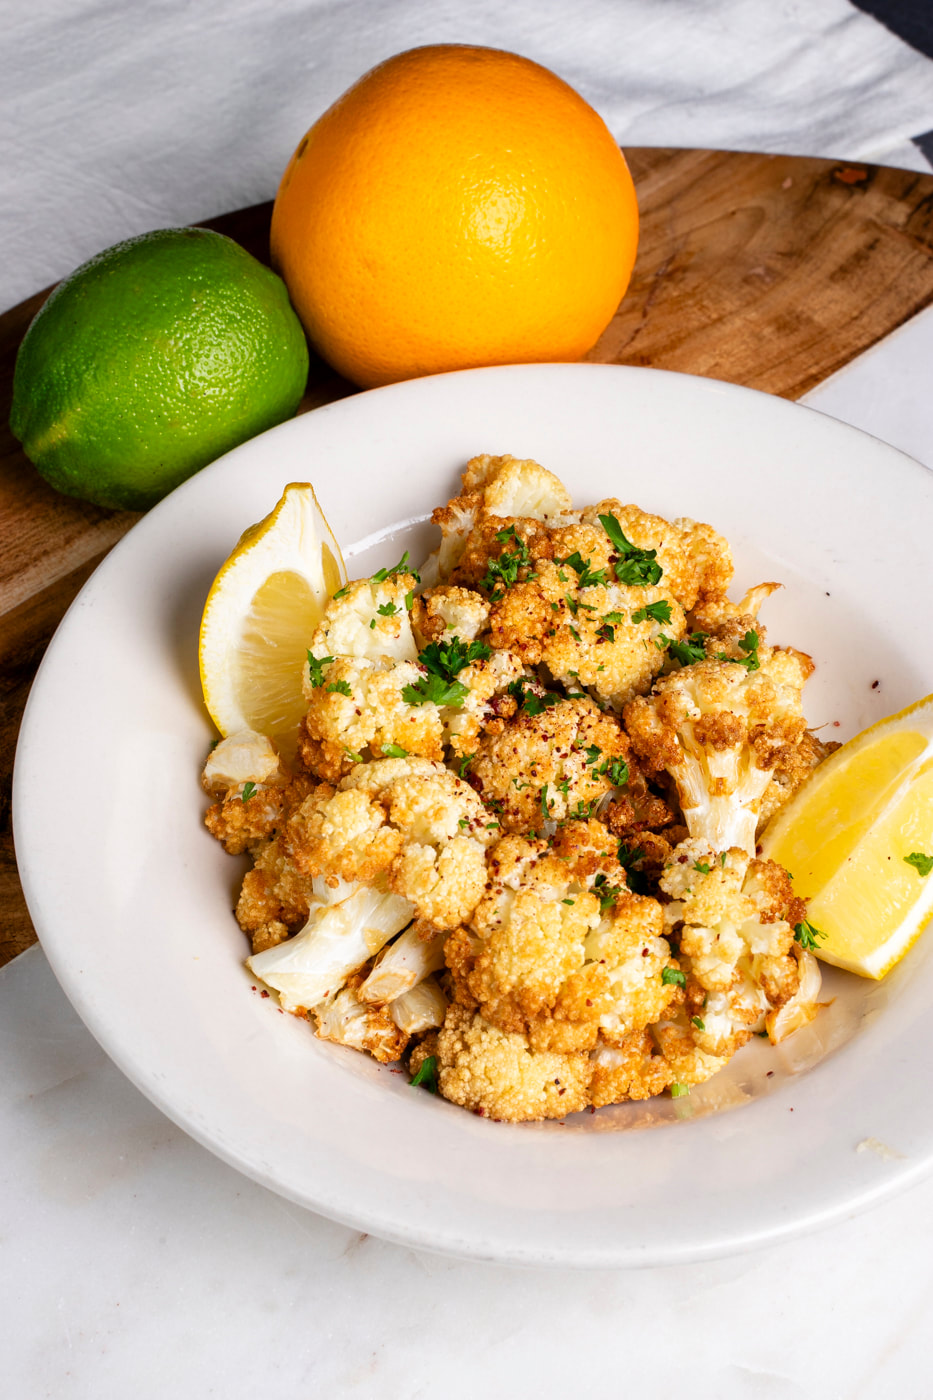 Cauliflower dish sprinkled with spices and fried